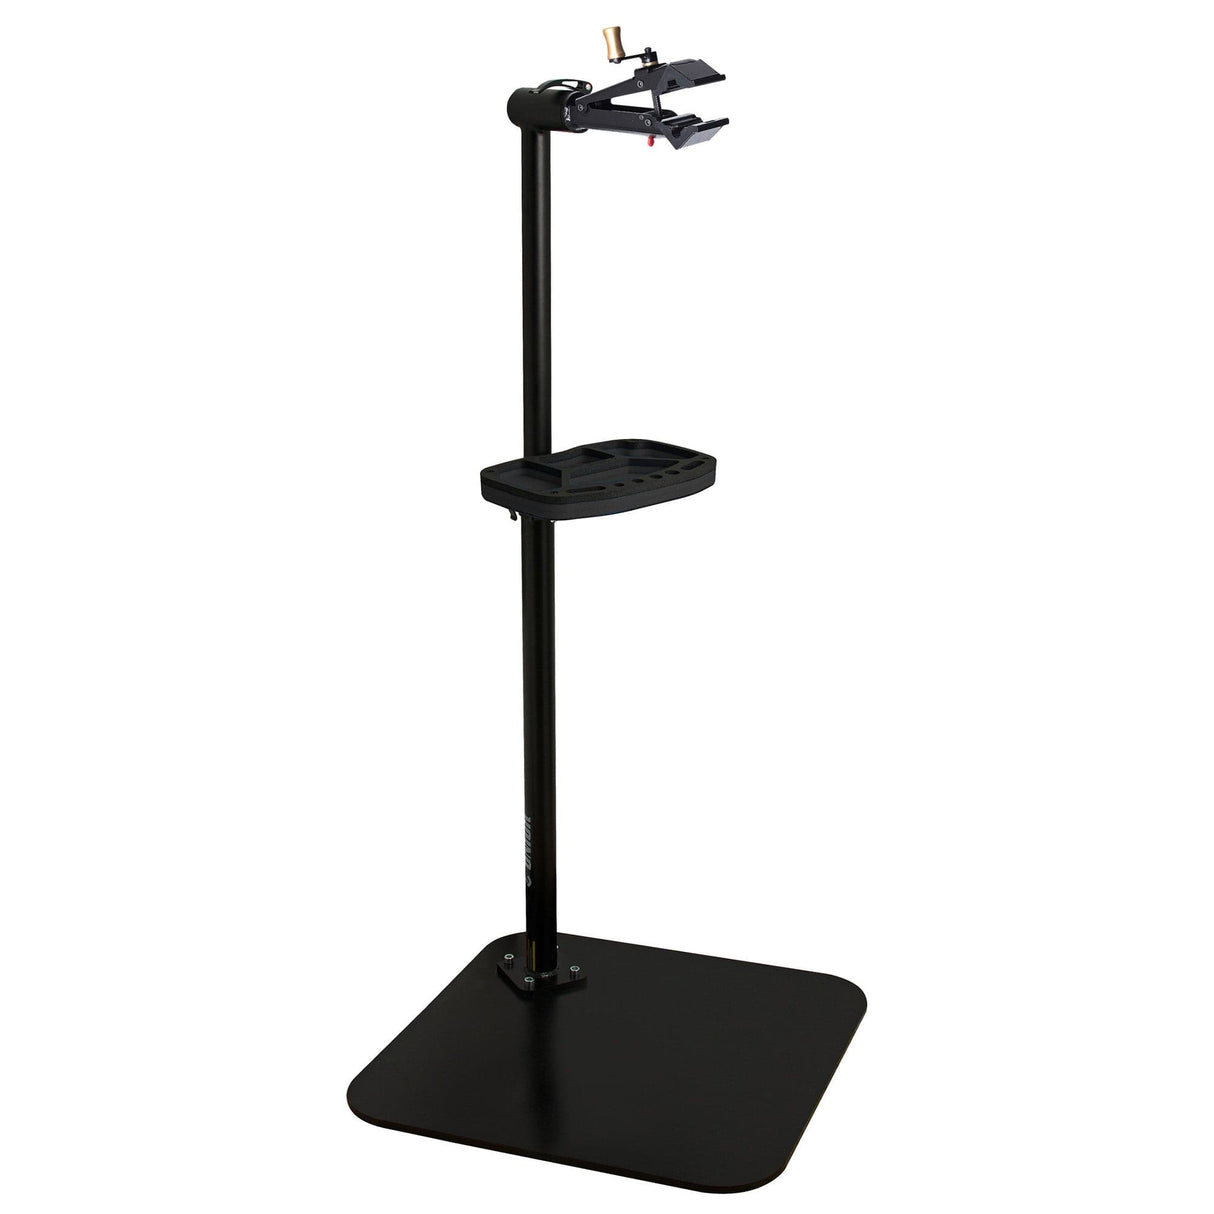 Unior Pro Repair Stand With Single Clamp, Quick Release: